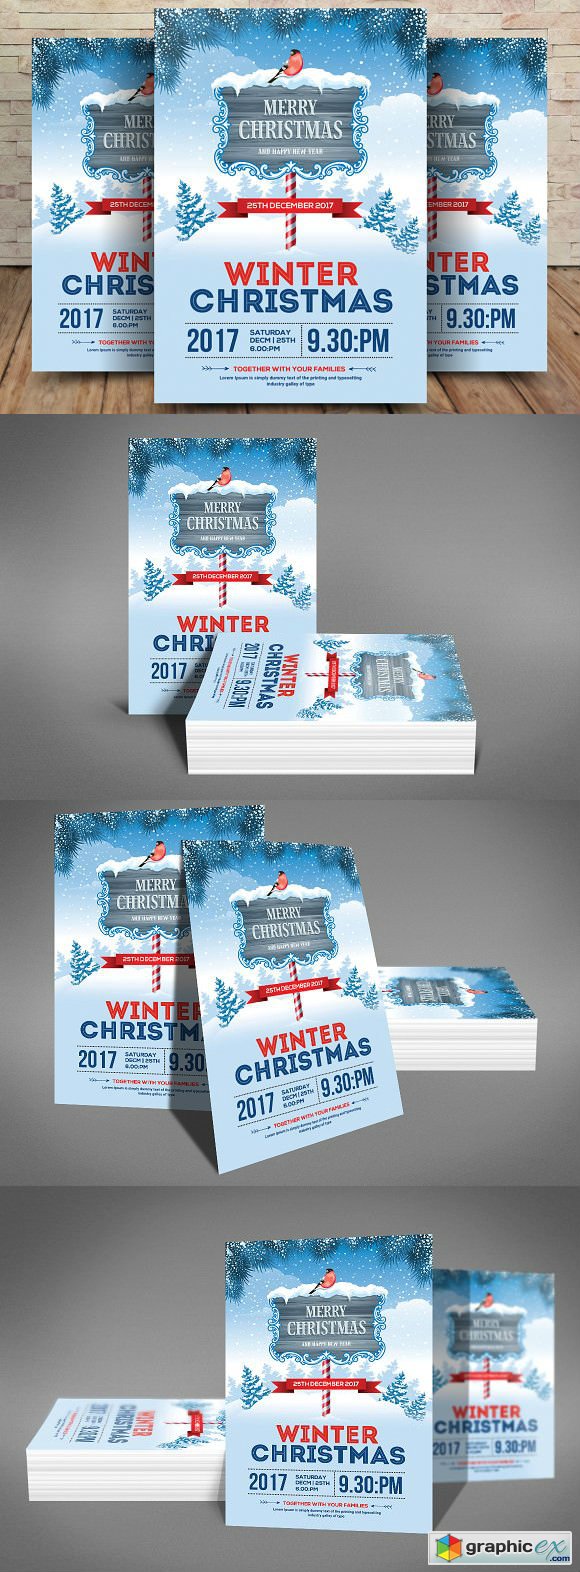 Merry Christmas Flyer Template 2019763